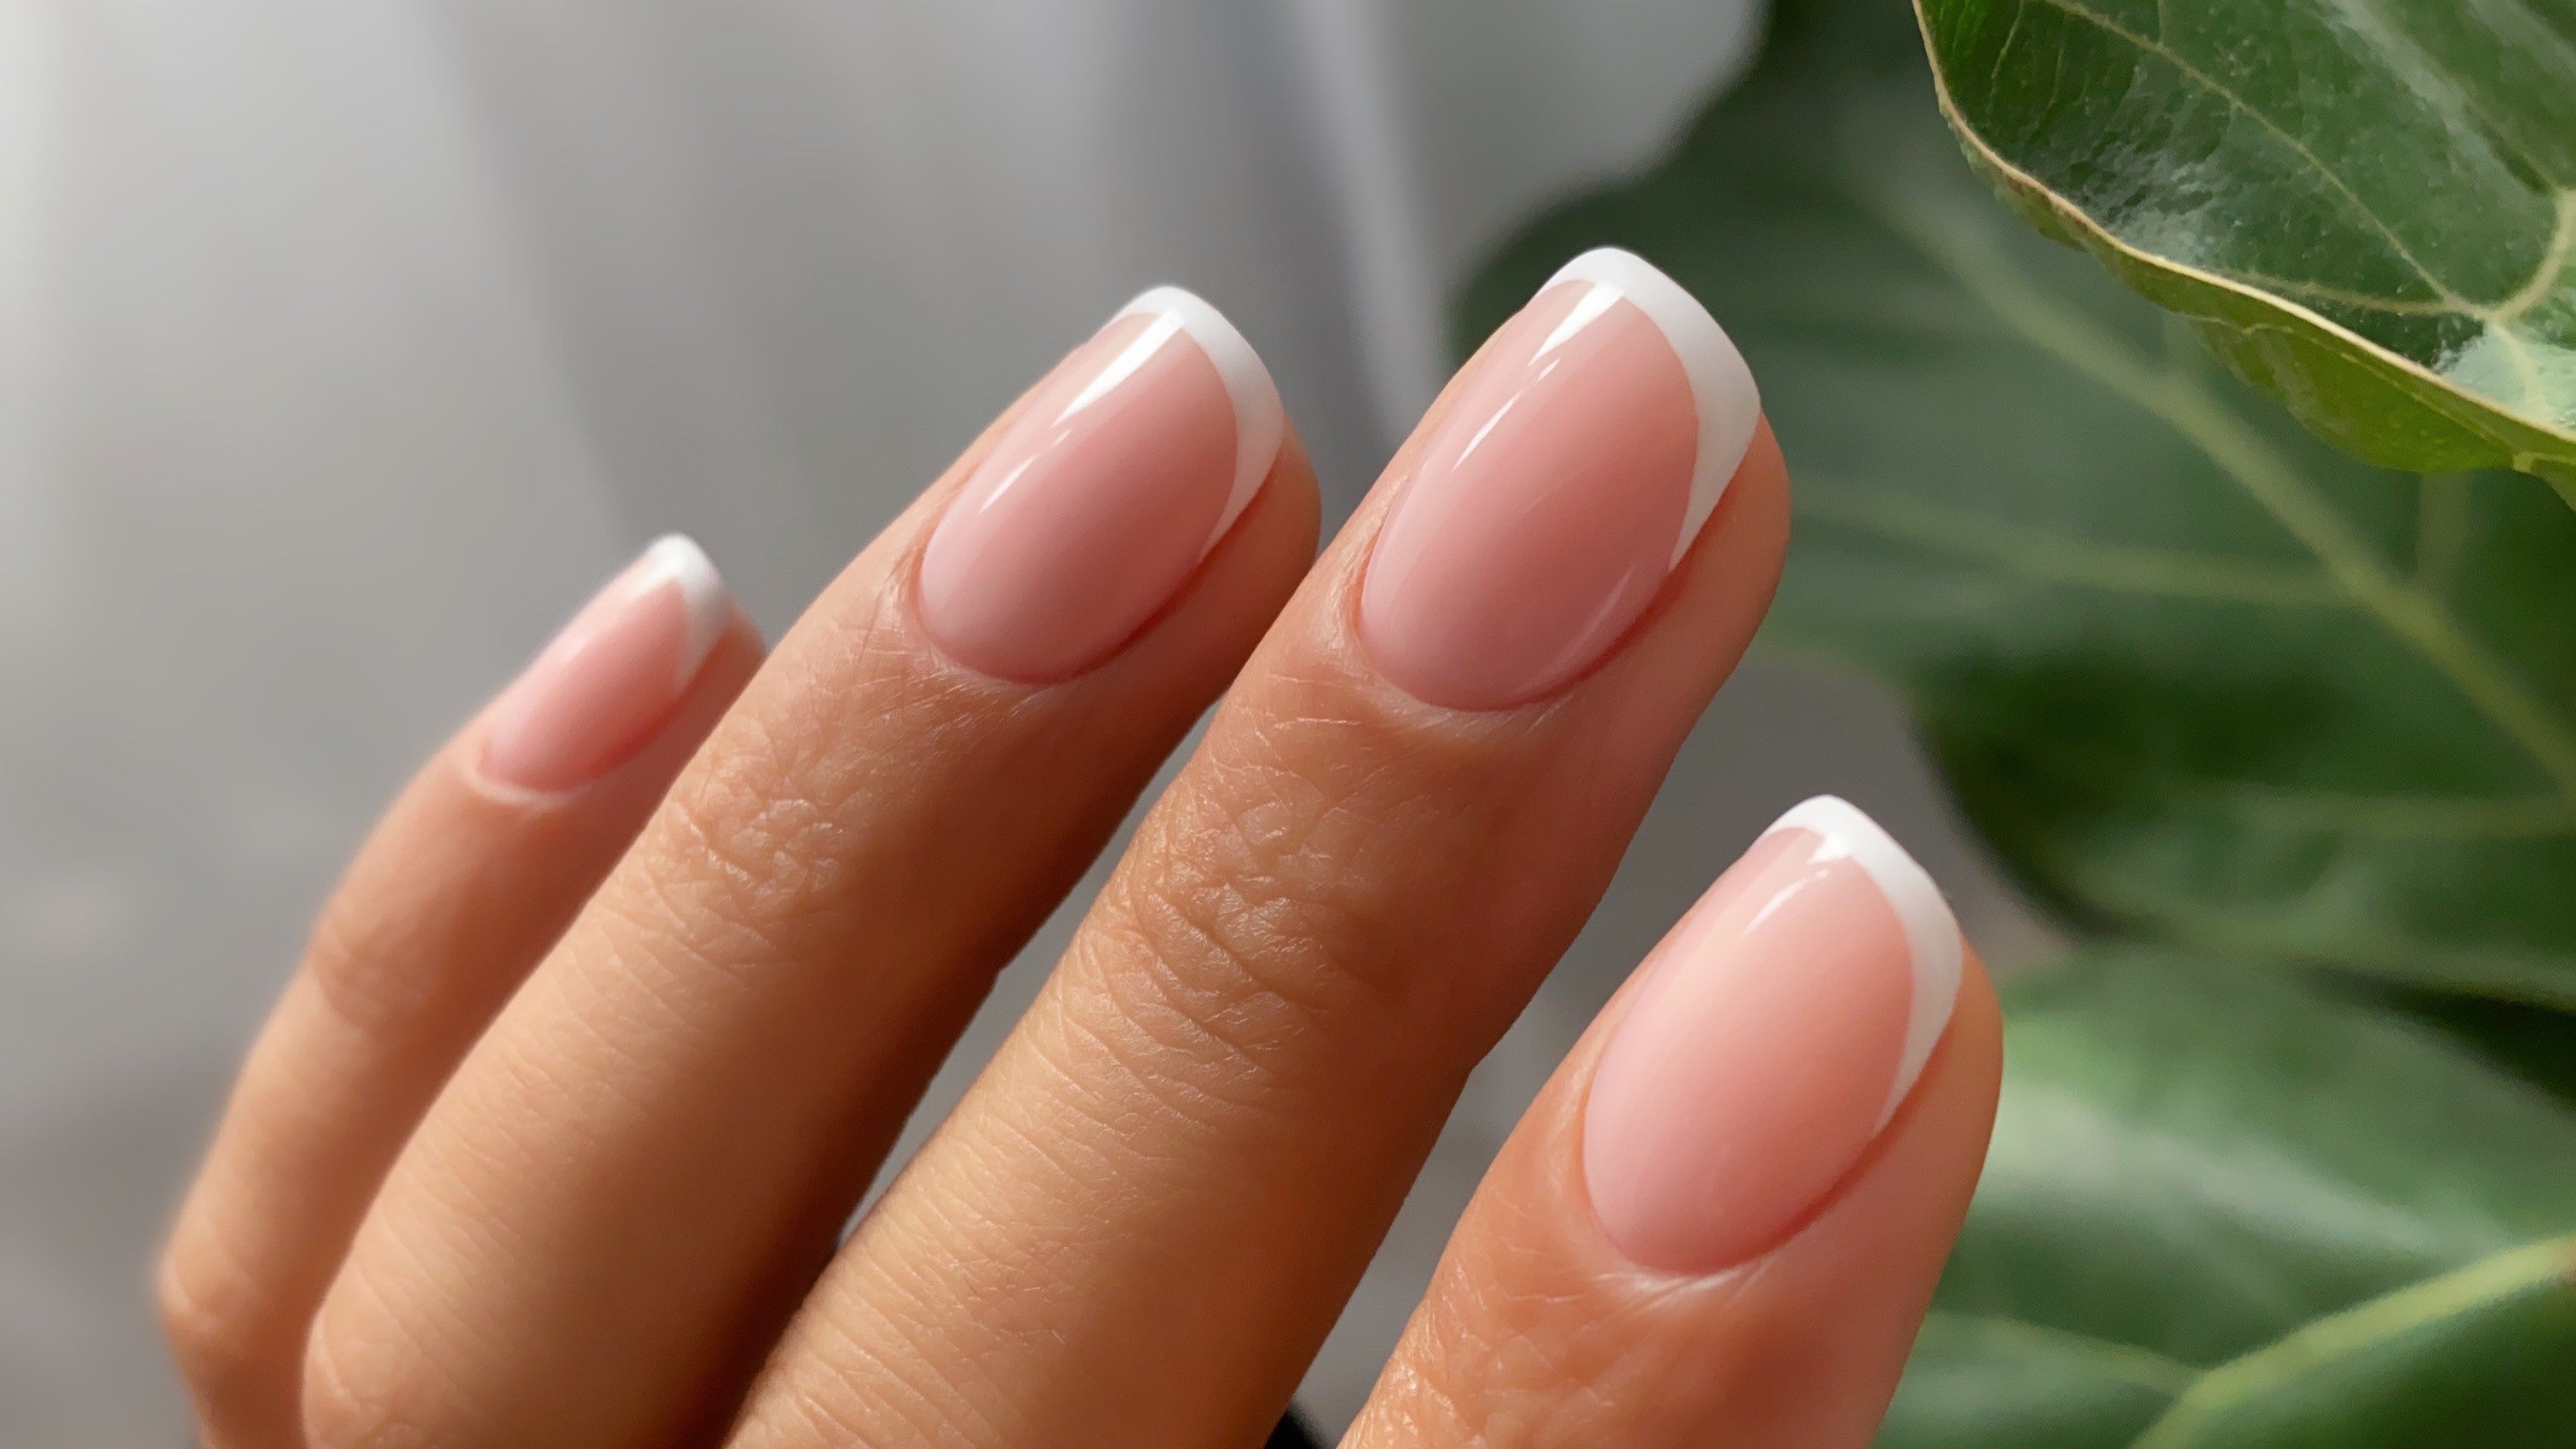 How to Grow Nails Faster Naturally? - SuperWowStyle - YouTube